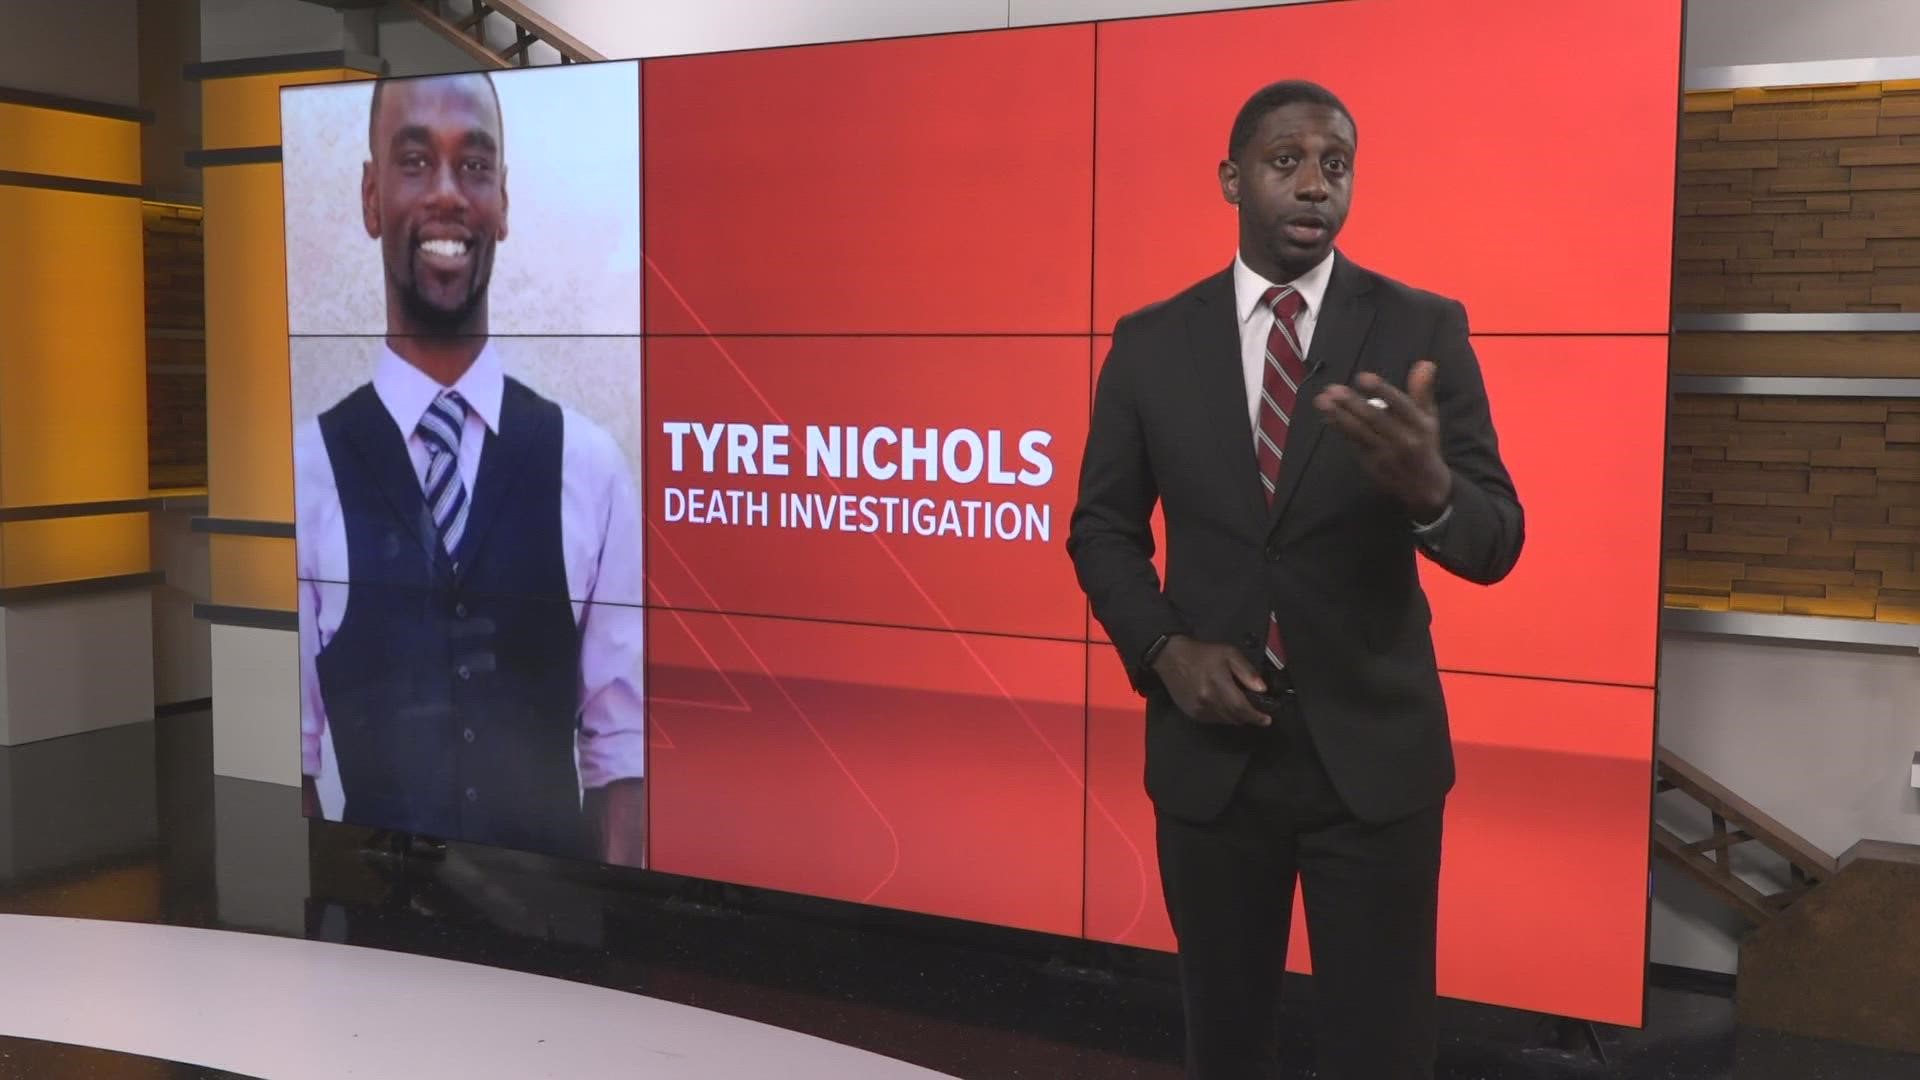 Ahead of the release of bodycam footage of the moments of brutality that allegedly killed Tyre Nichols, here are ways to sensor sensitive content online if wanted.